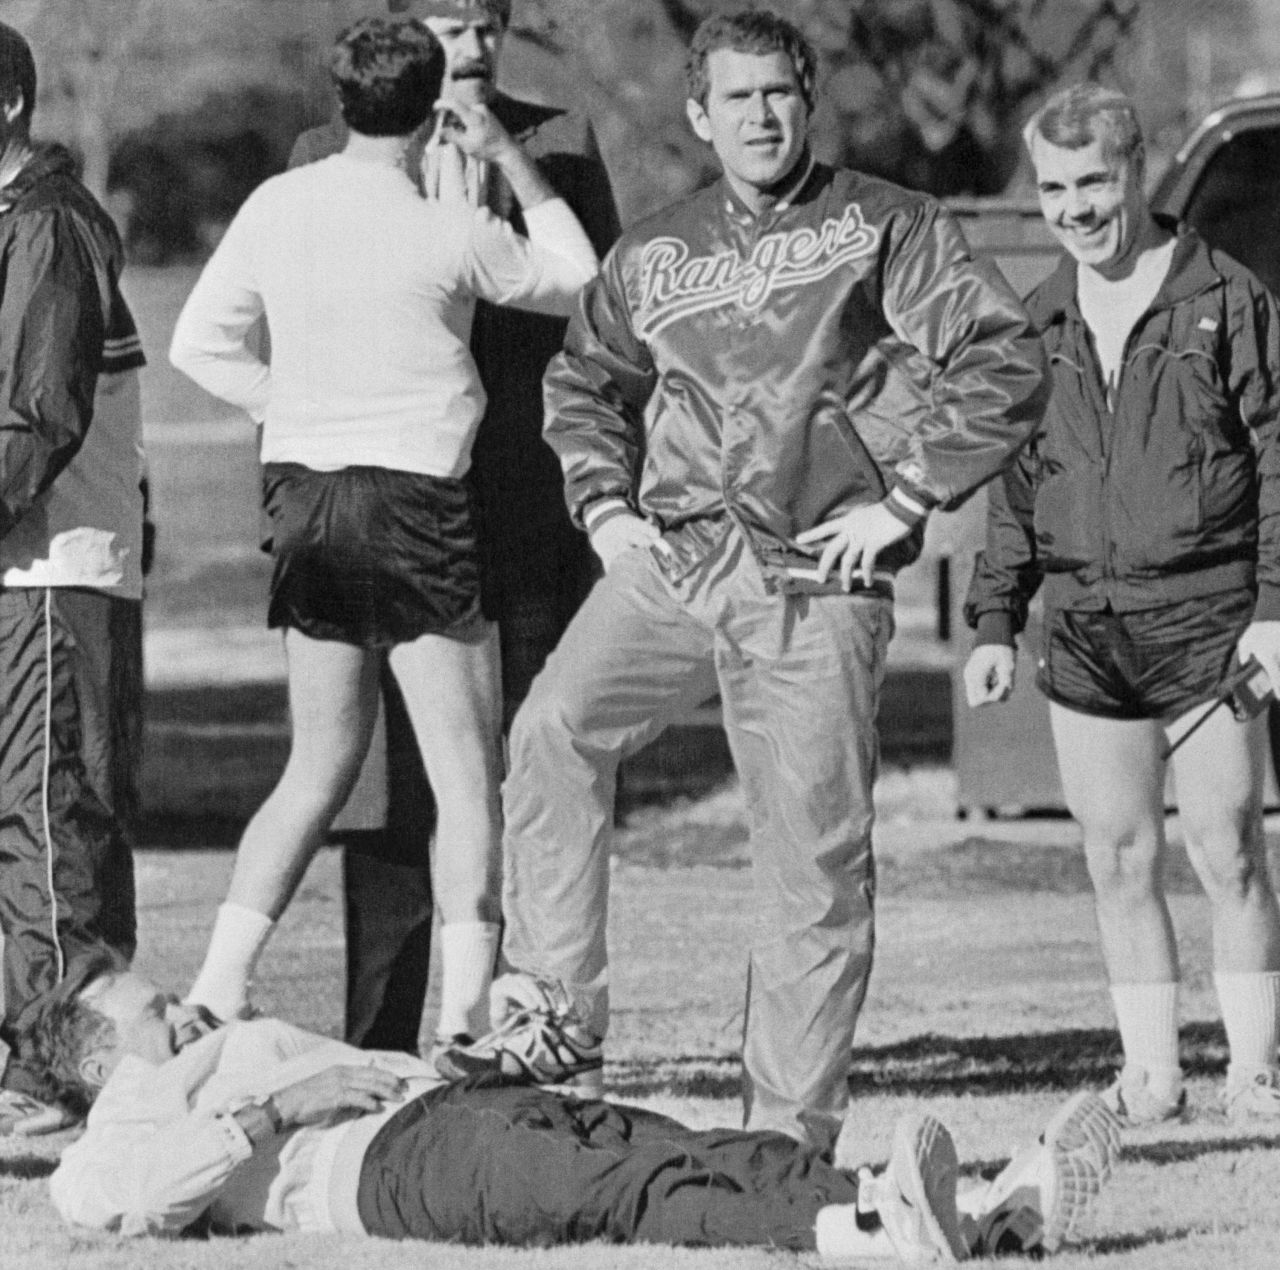 Bush has a "leg up" on his father as he clowns around for the camera in 1990. A year earlier, the younger Bush became part-owner of the Texas Rangers baseball team.